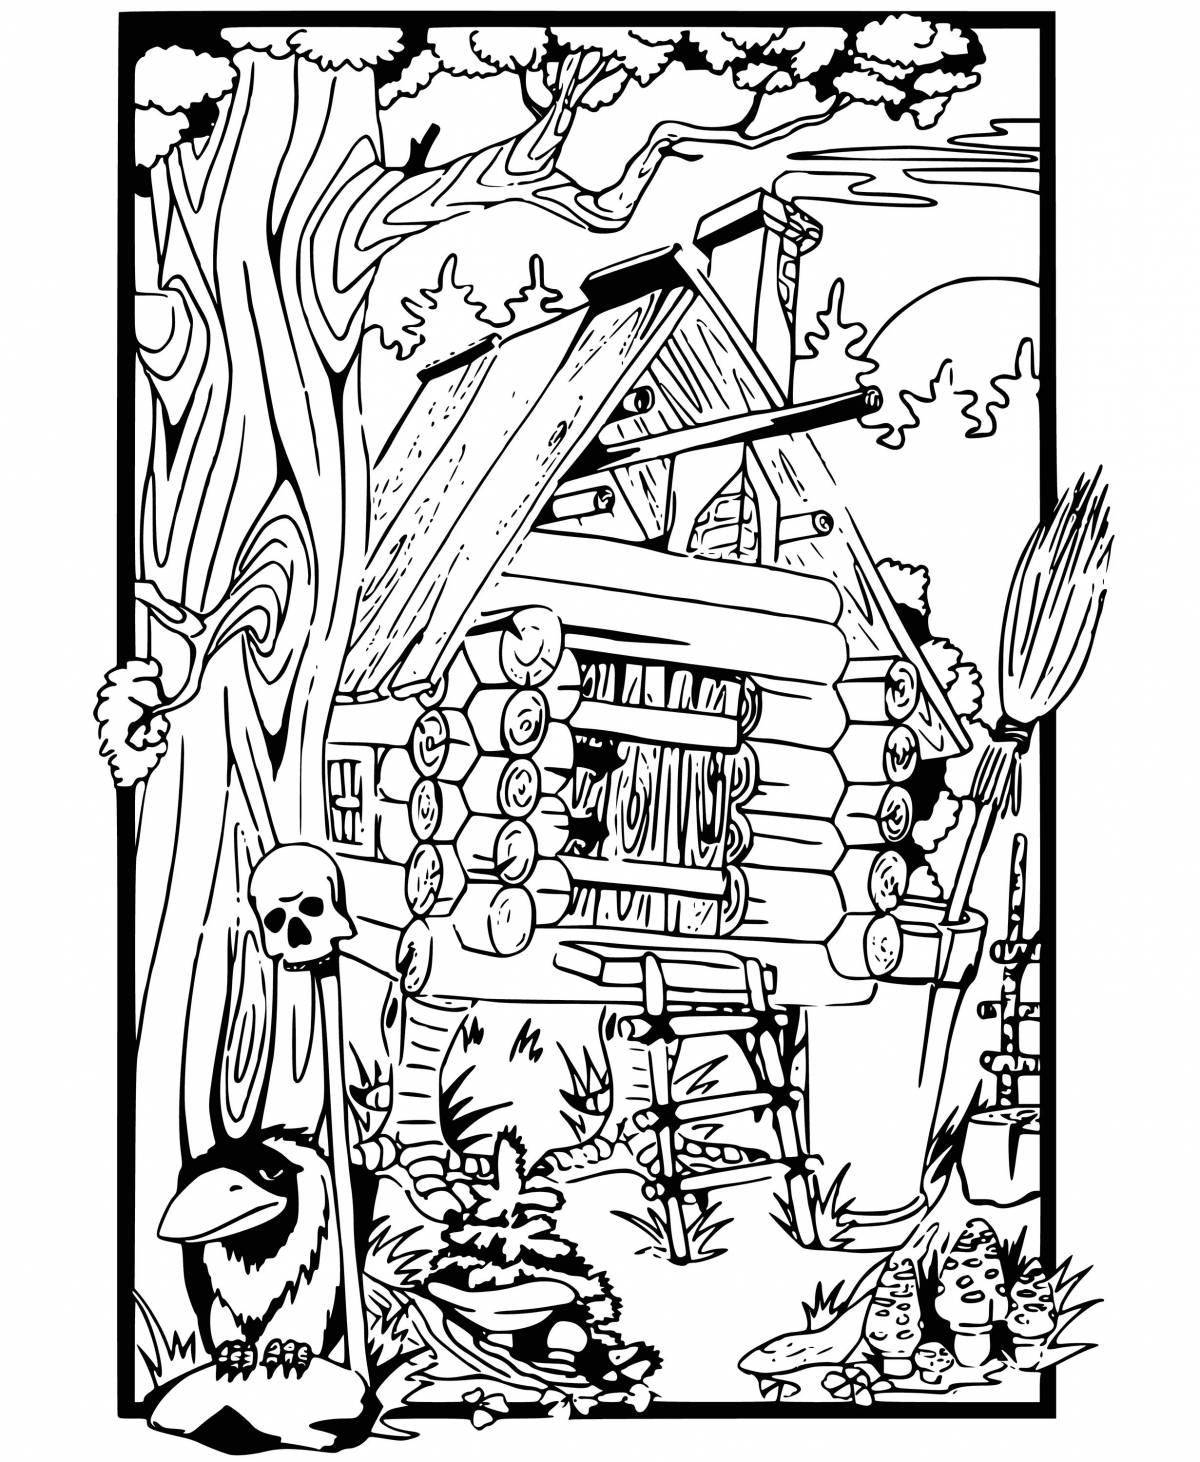 Baba Yaga's radiant house coloring page